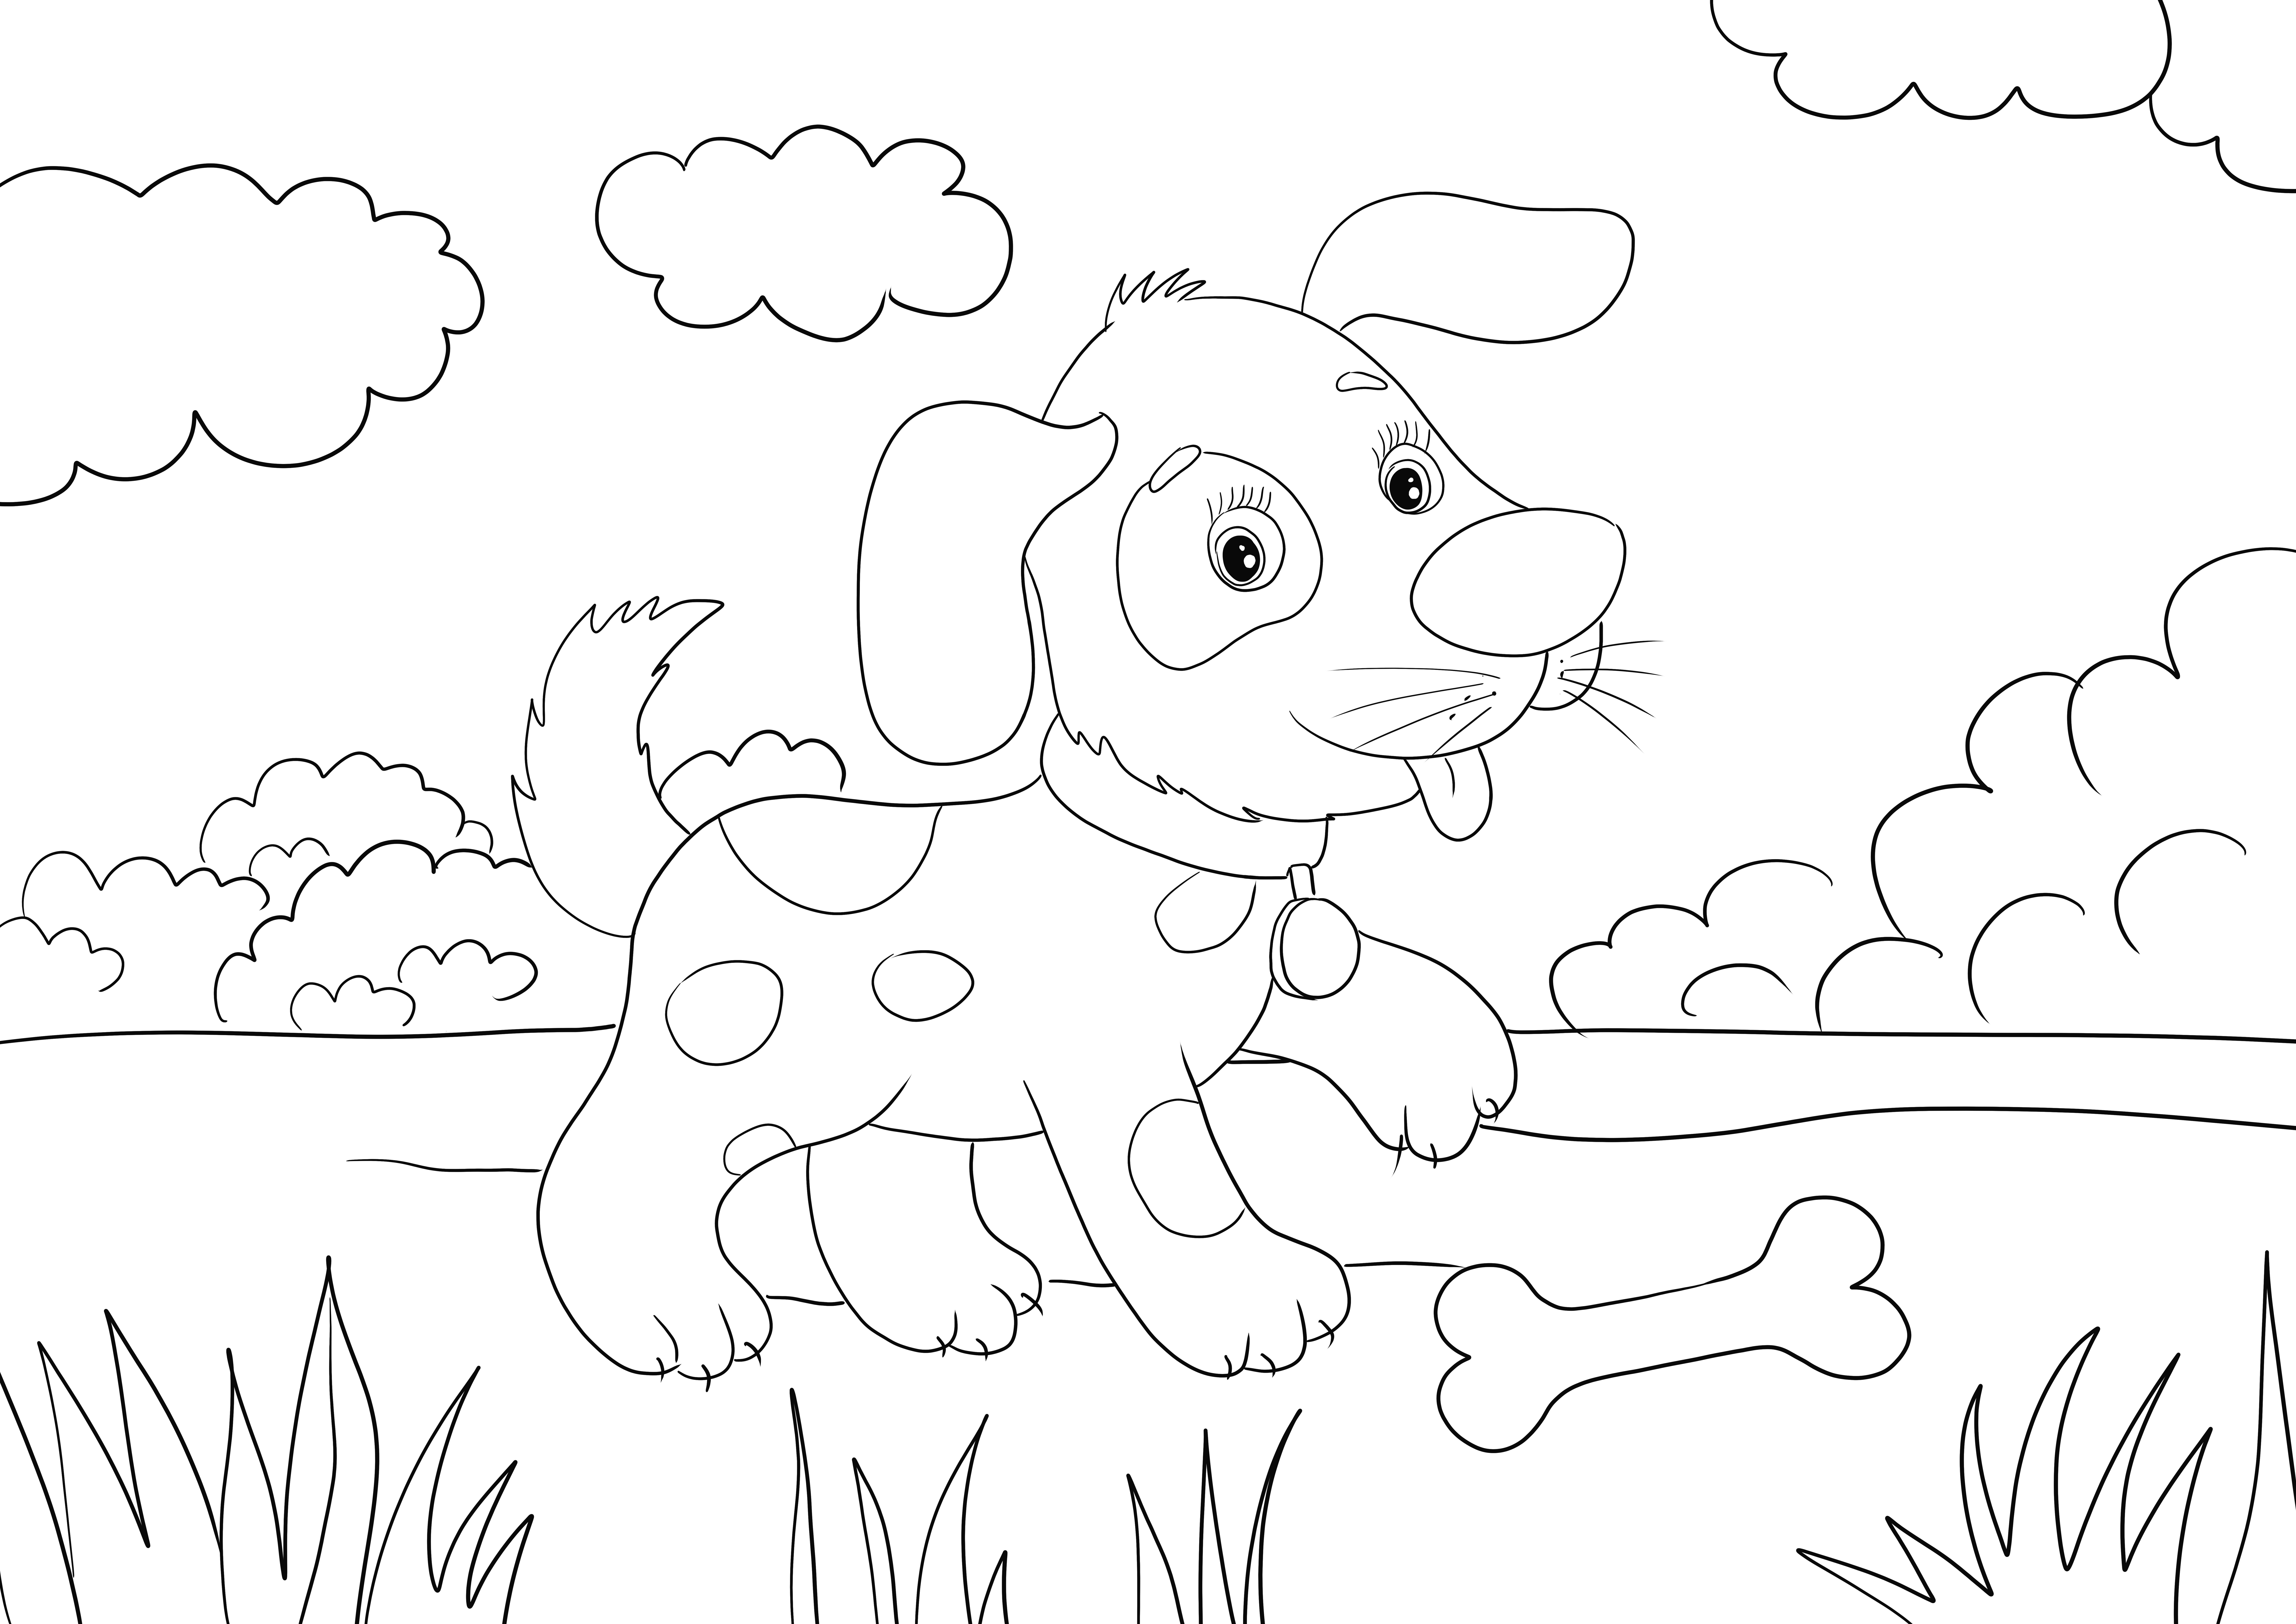 Cute little dog licking a bone-free printable coloring sheet for kids